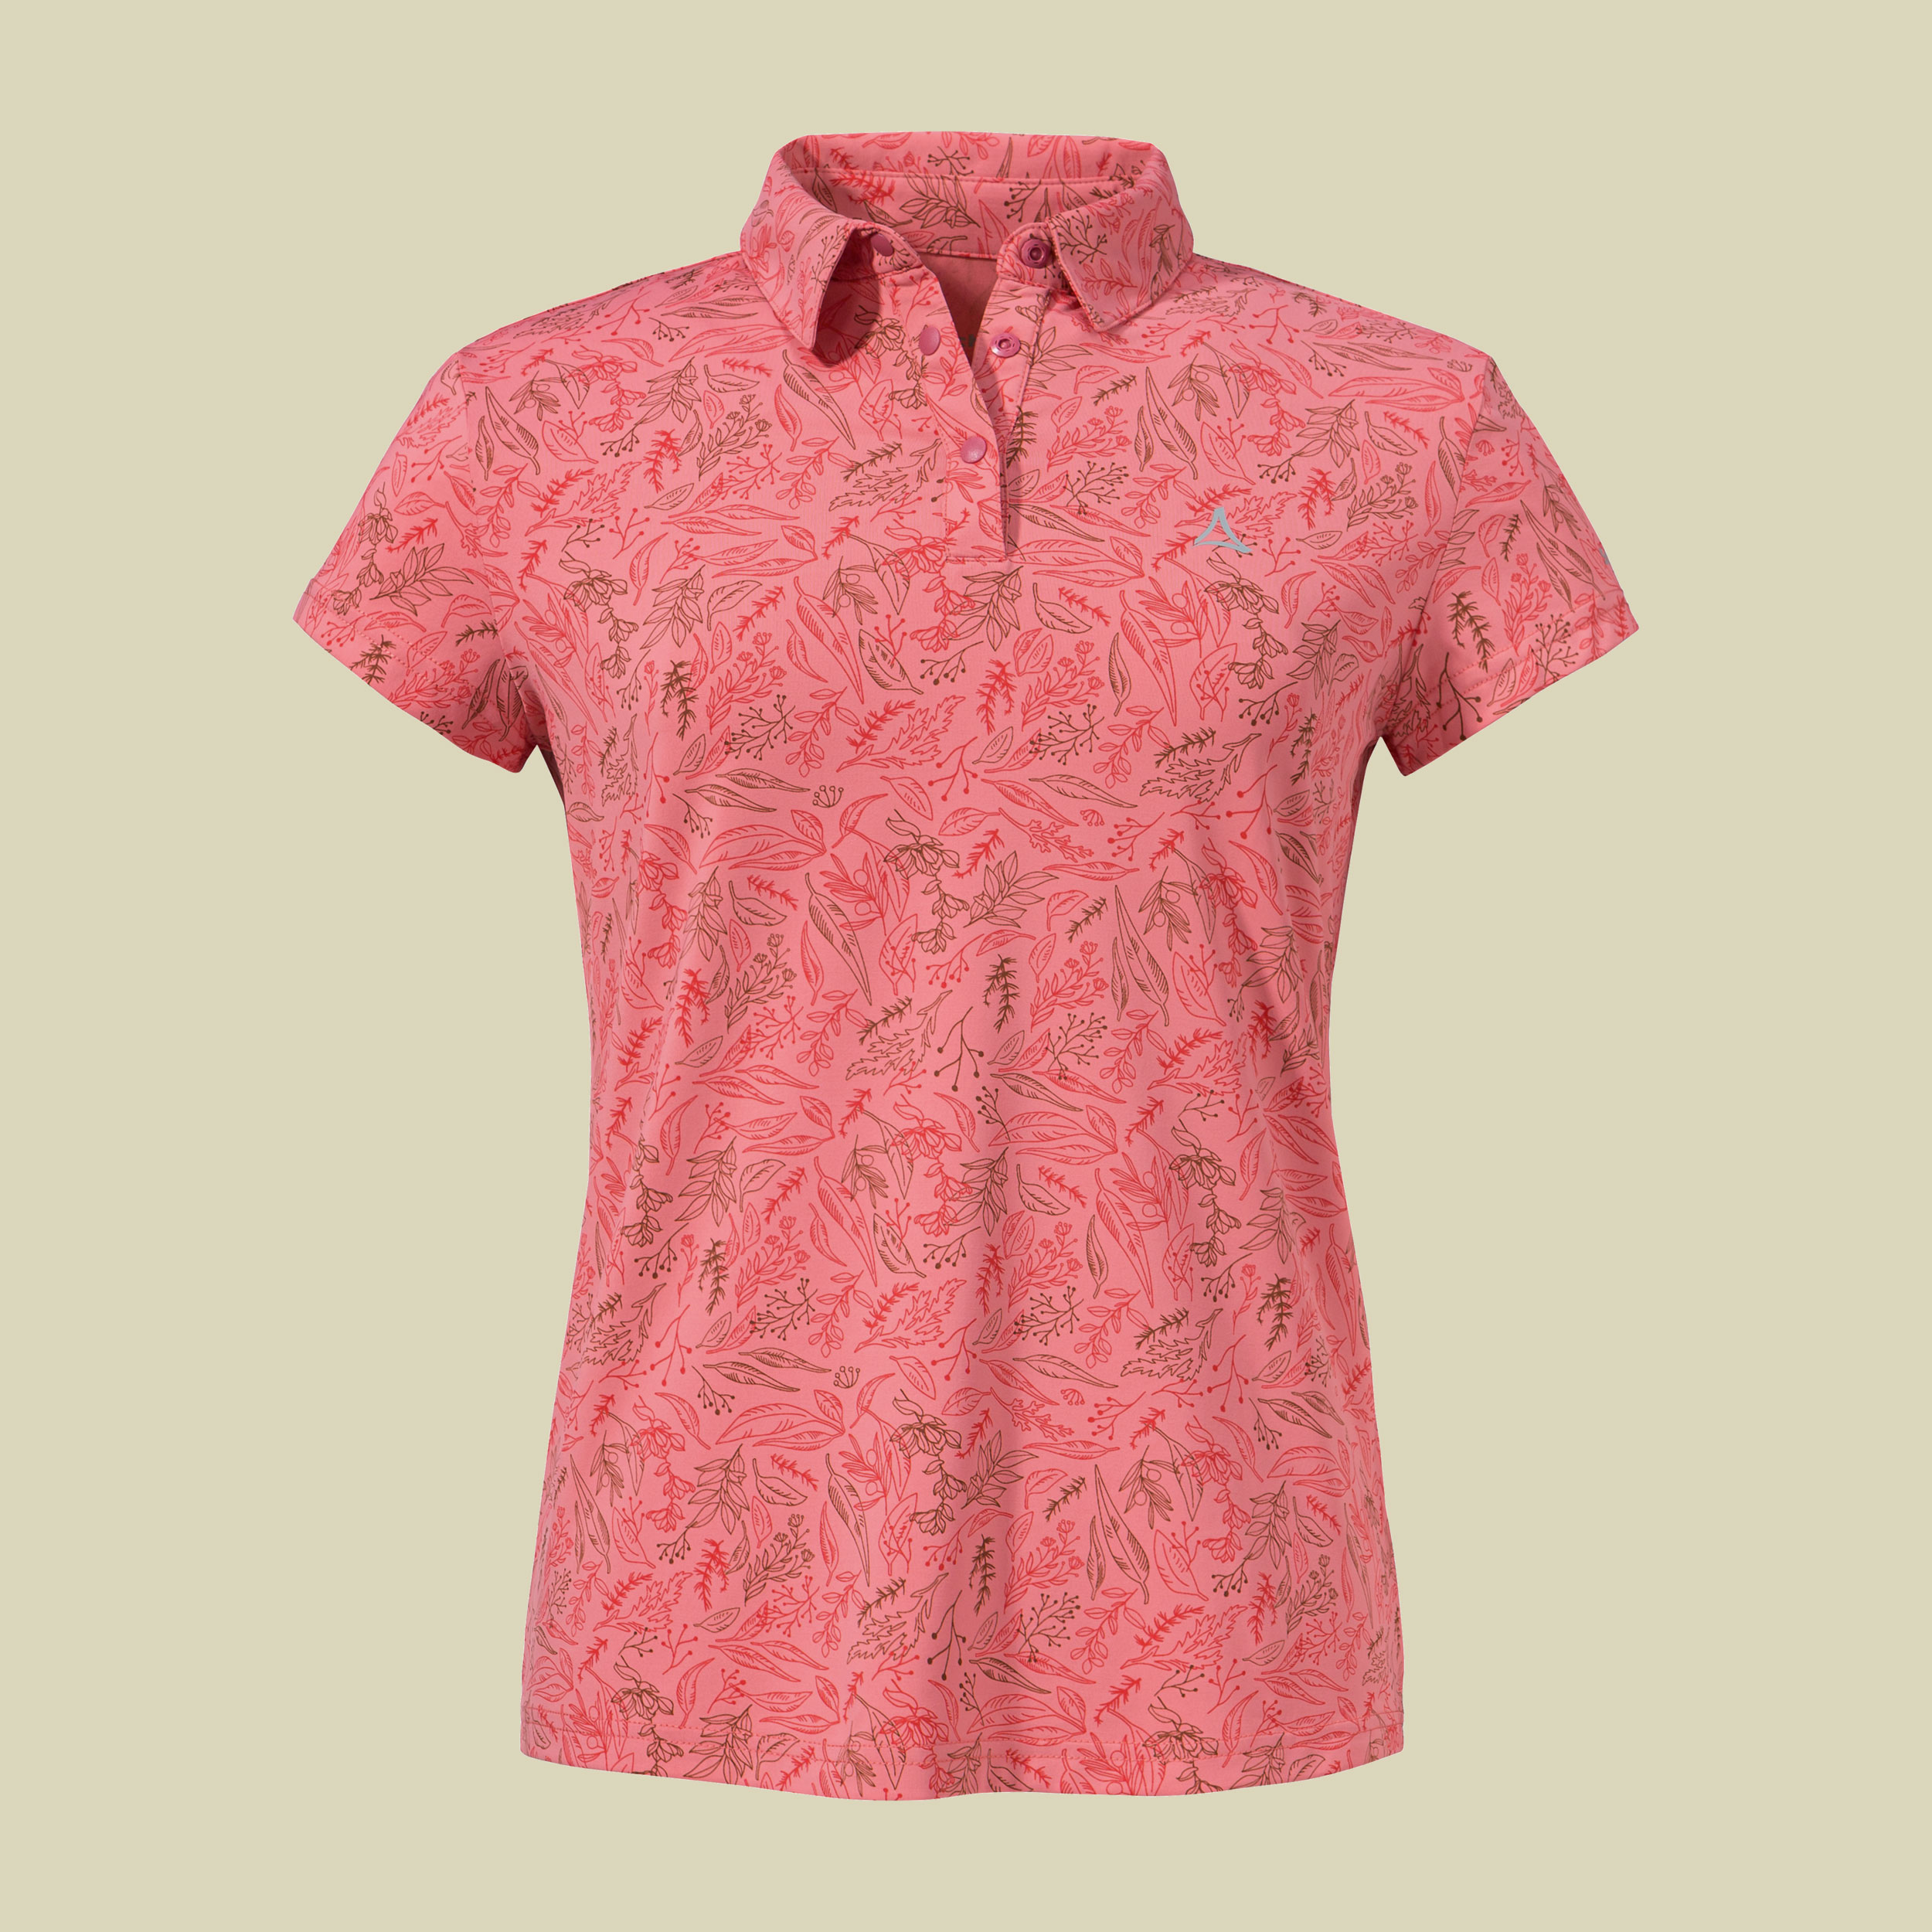 Polo Shirt Sternplatte L Women 40 rot - clasping rose